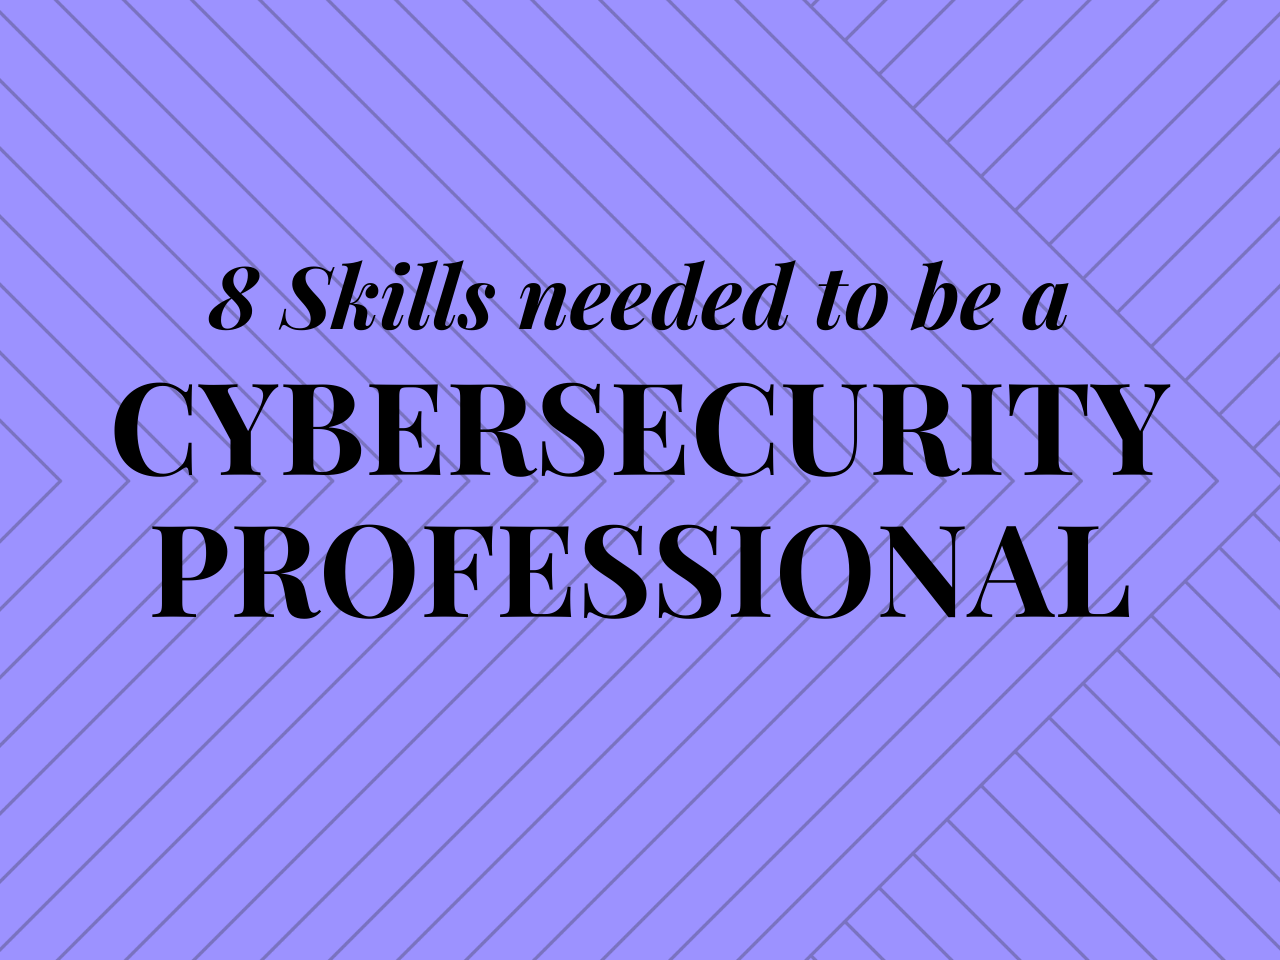 8 skills needed to be a cybersecurity professional